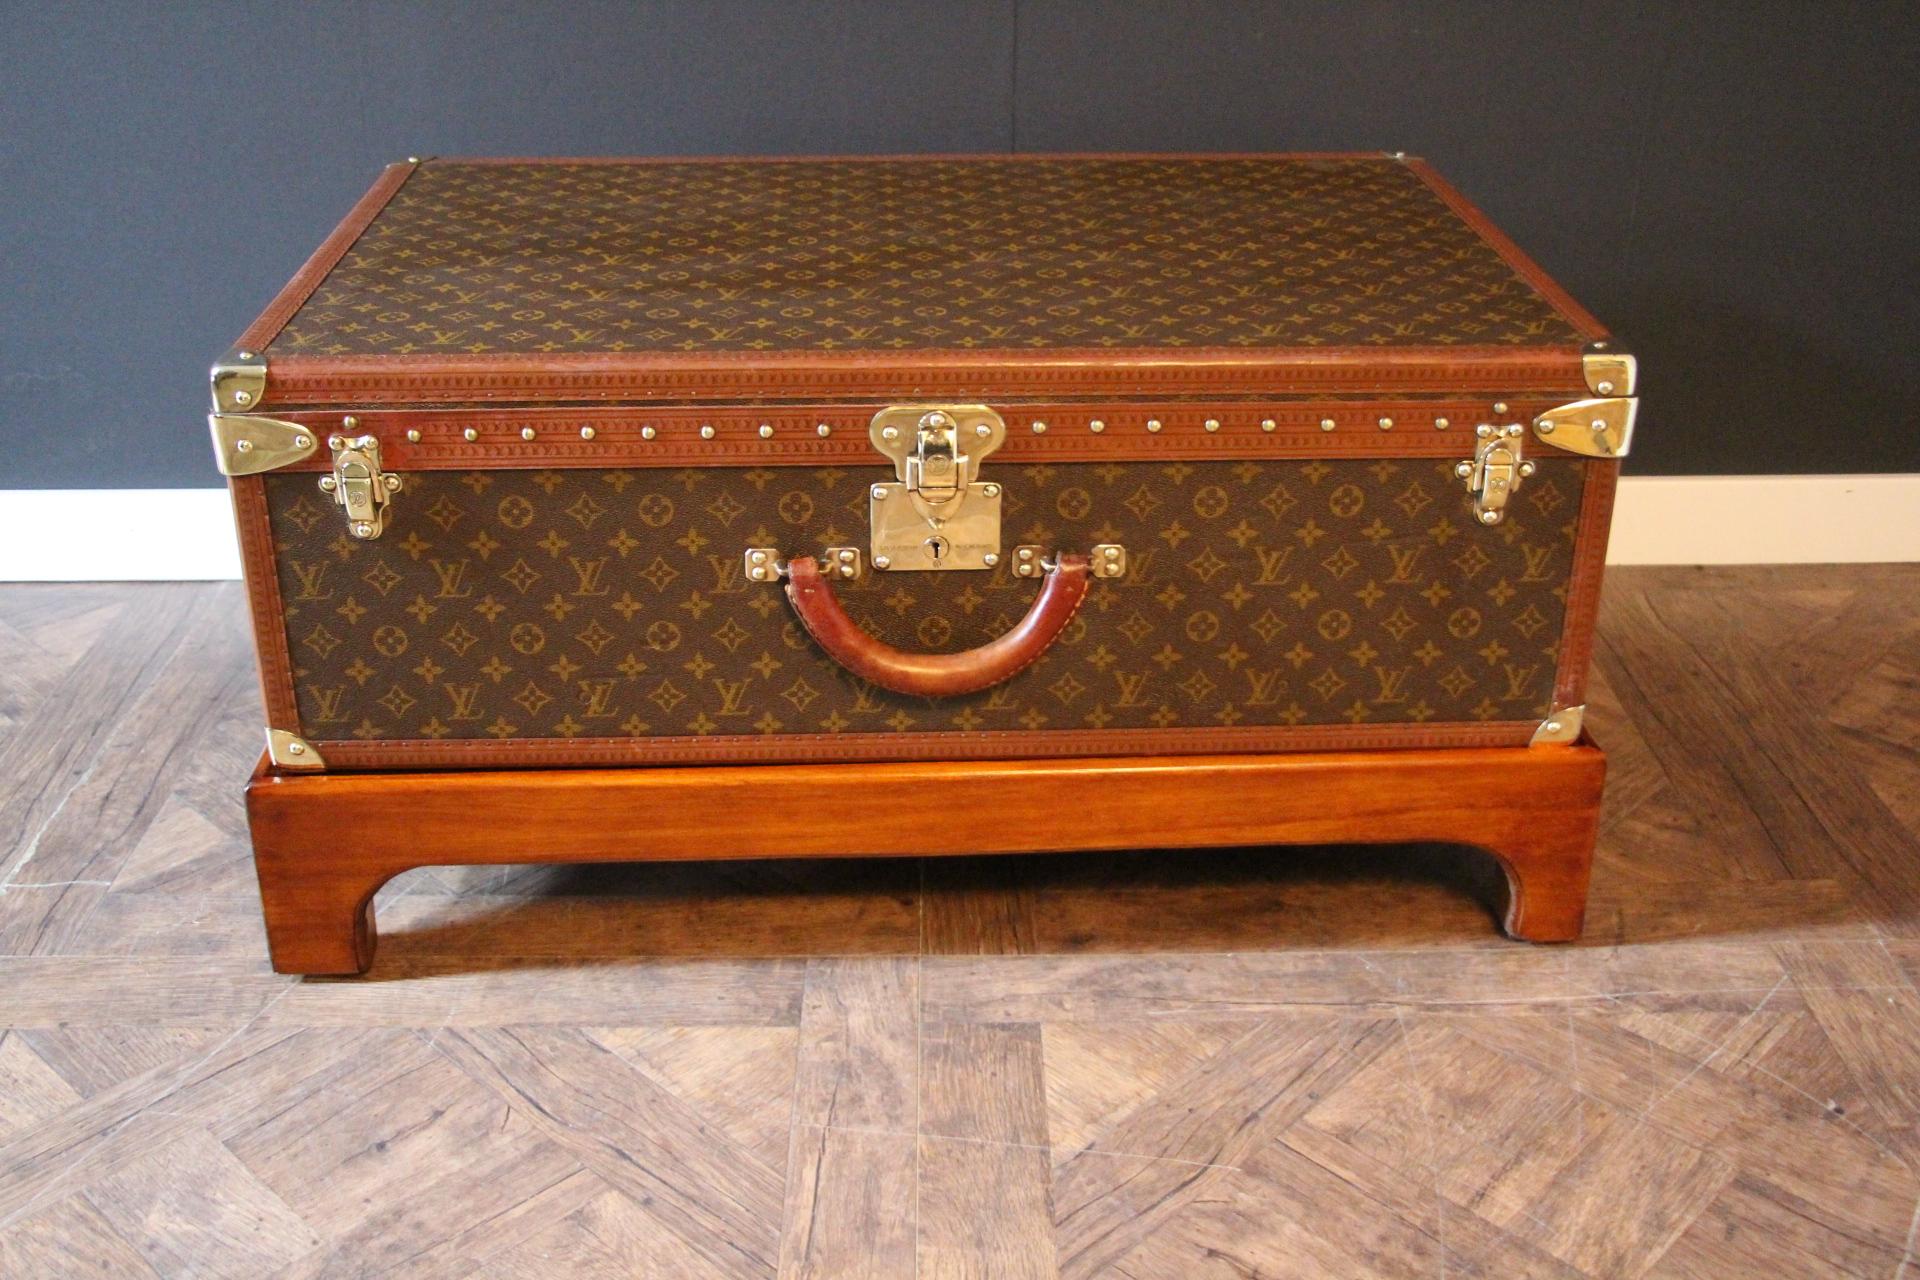 Magnificent Louis Vuitton Alzer monogramm suitcase. This 80 cm suitcase is the largest and the most luxury one made by Louis Vuitton. All Louis Vuitton stamped solid brass fittings: locks, clasps and studs. Very nice interior, fresh and clean, no